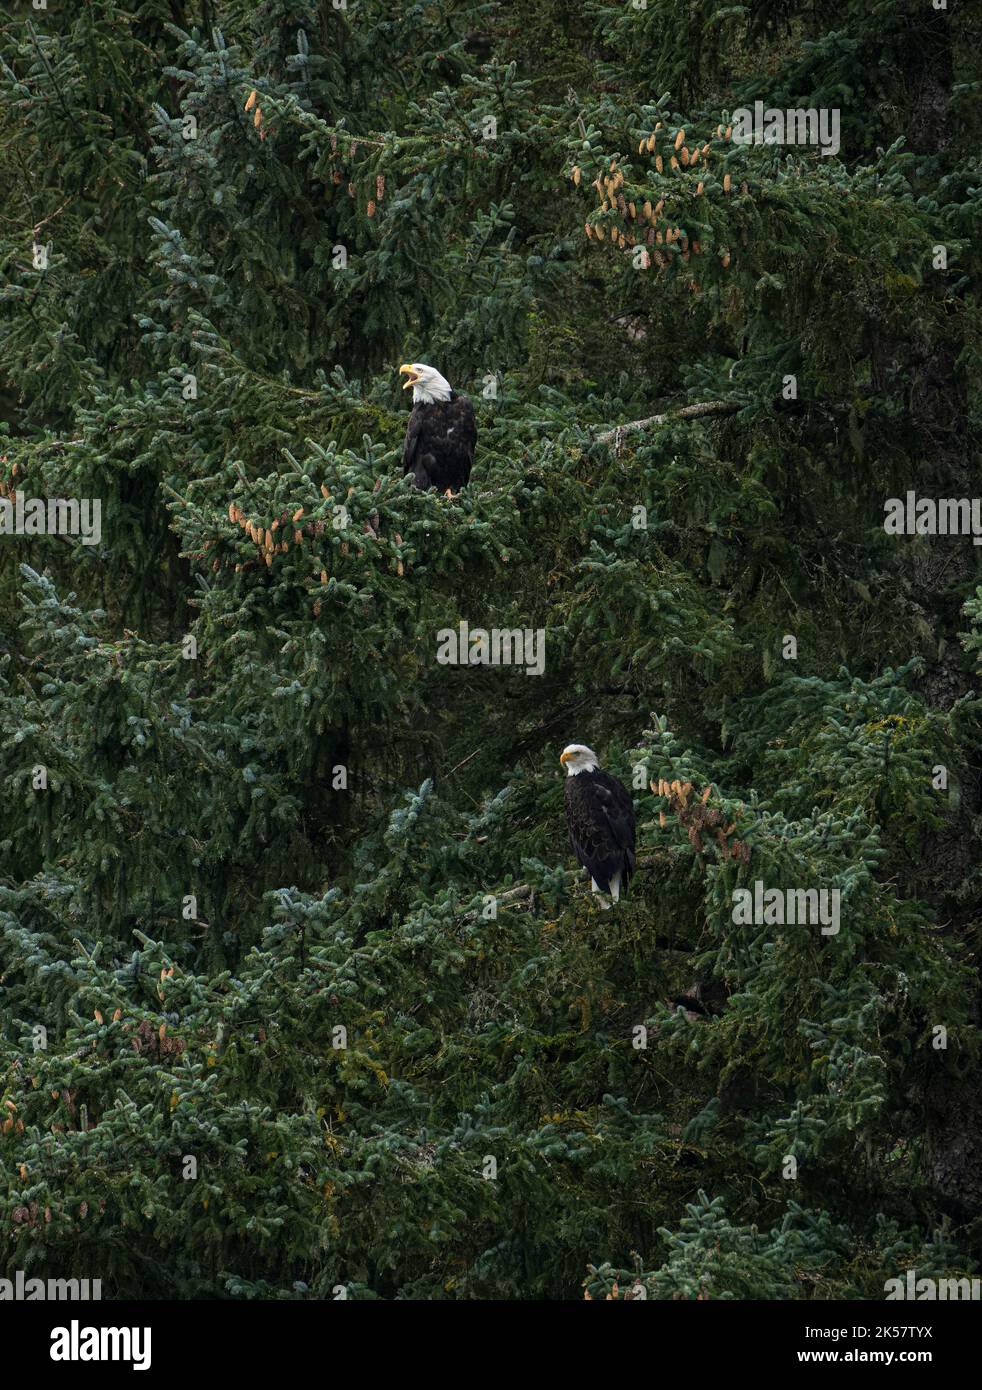 Two bald eagles (Haliaeetus leucocephalus) perch in trees along the Chilkoot River in Alaska. Stock Photo